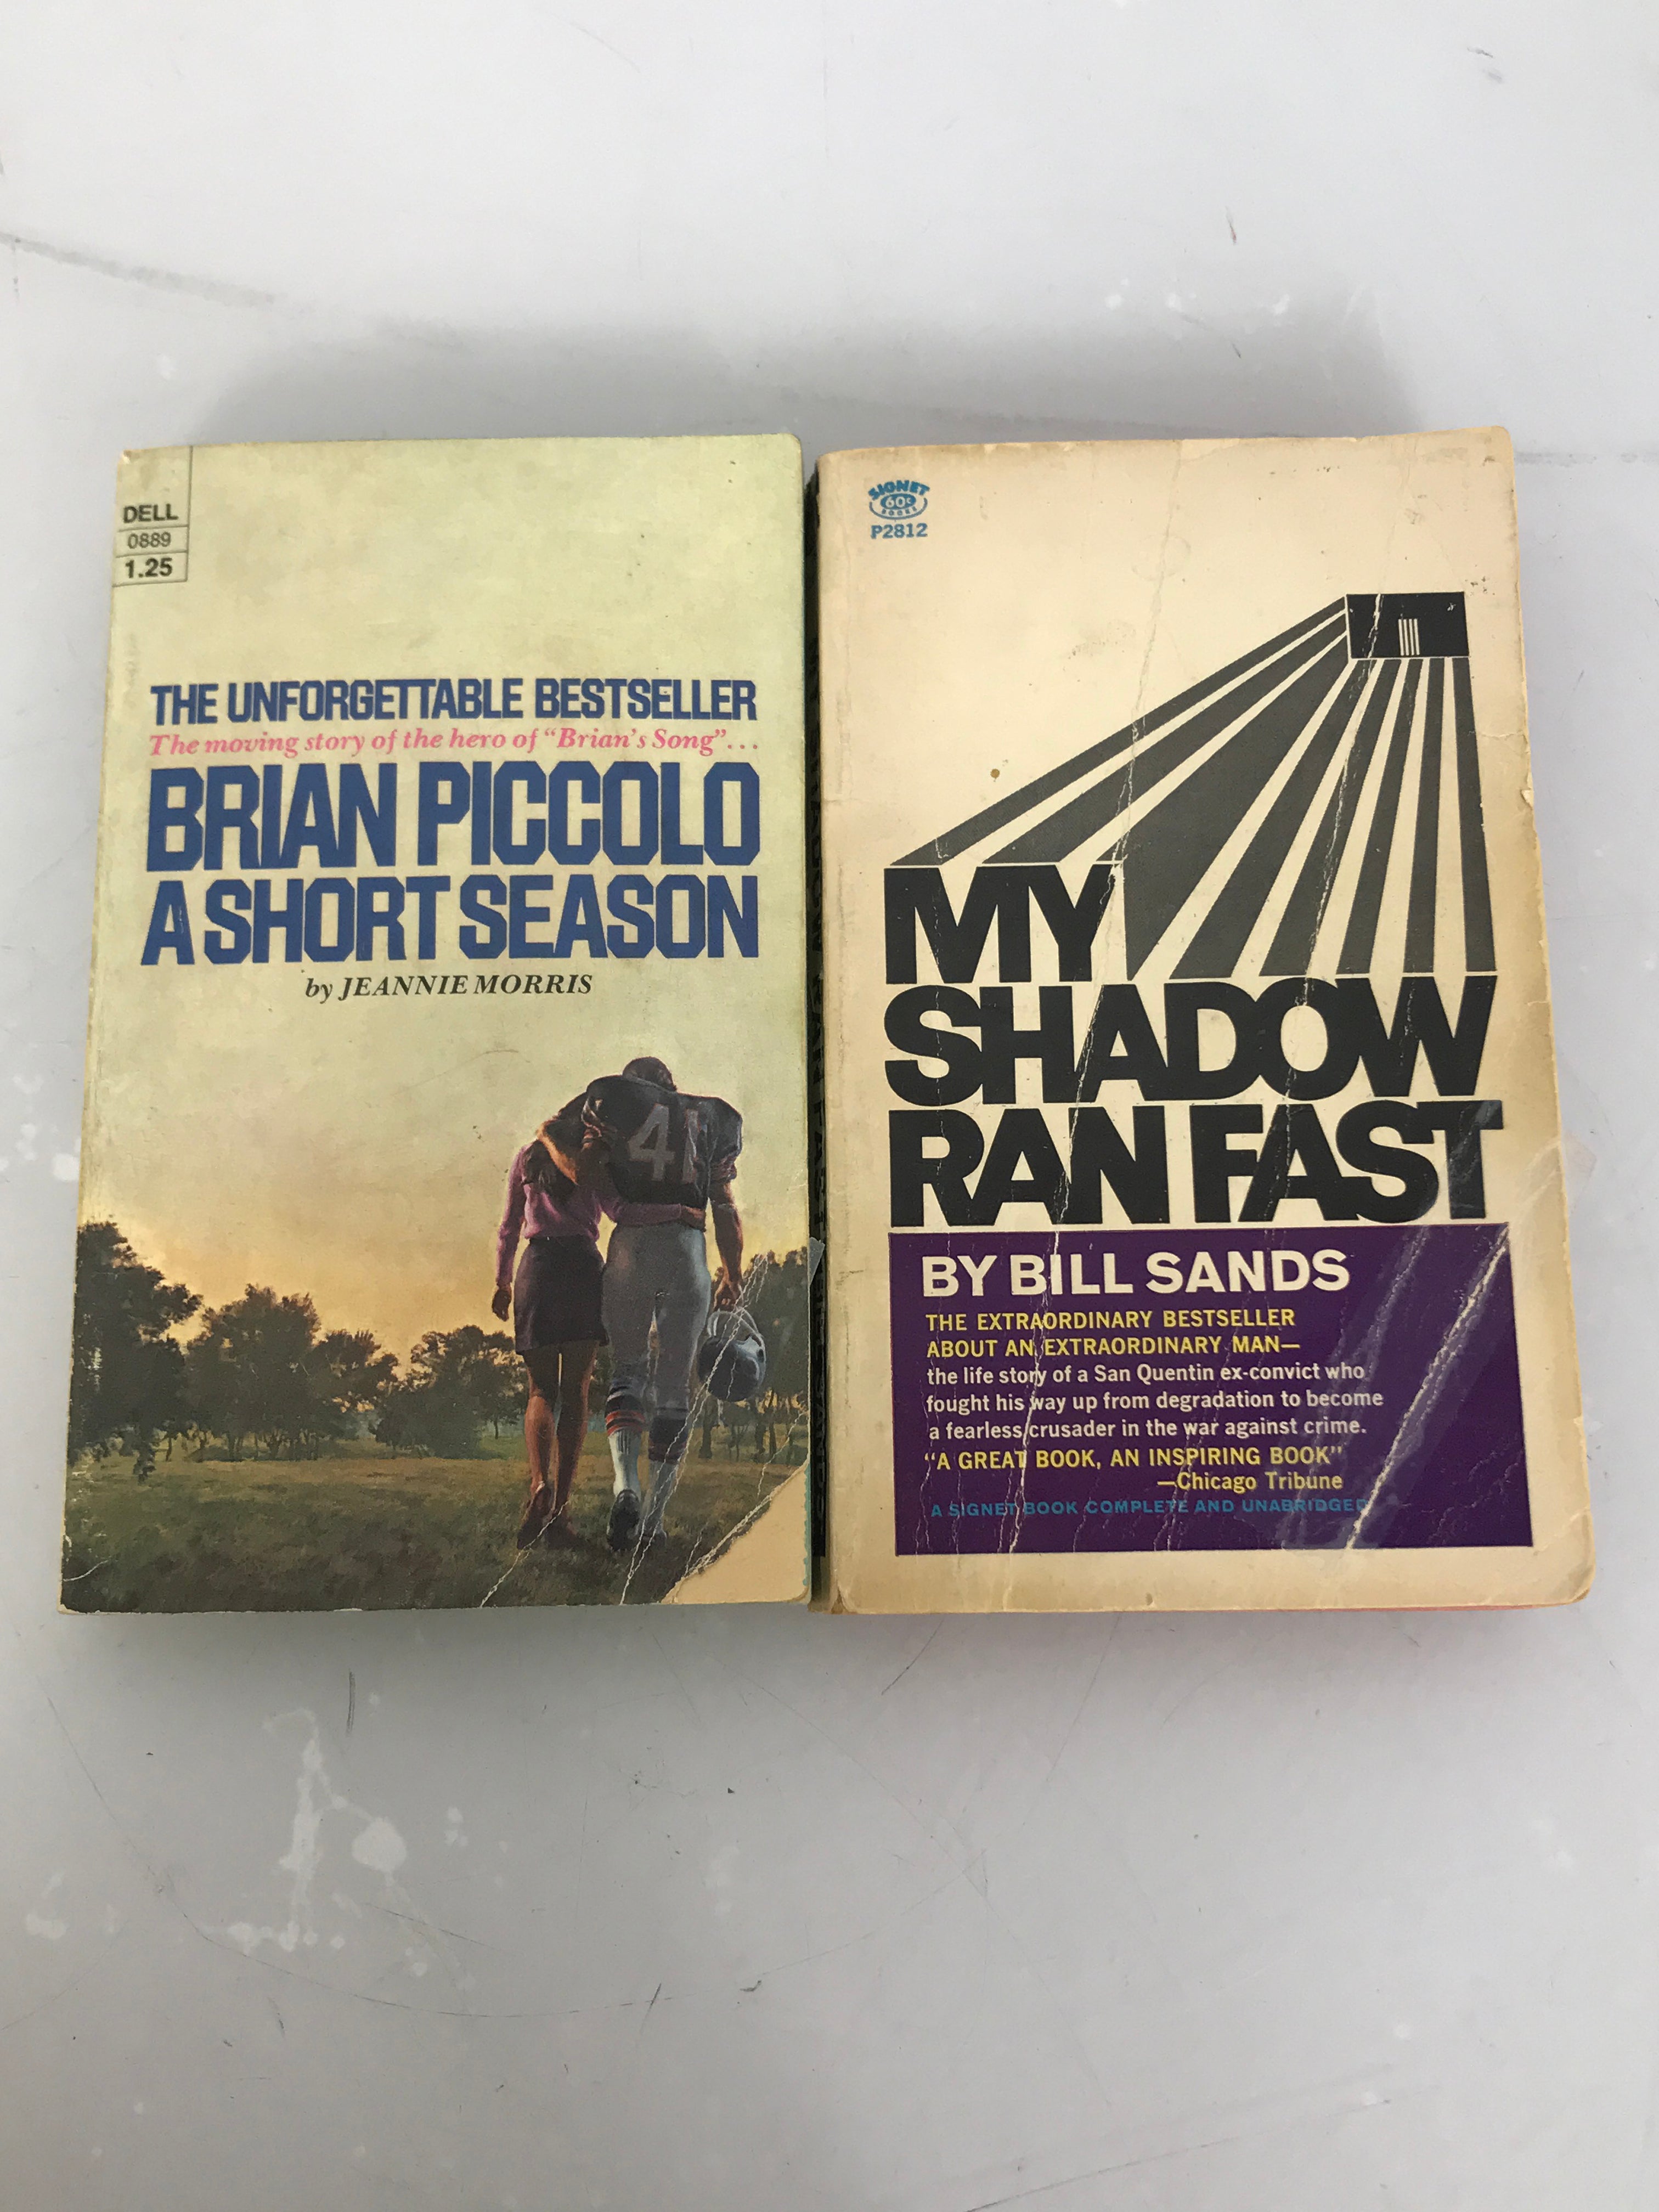 Lot of 2 Vintage True Stories: Brian Piccolo A Short Season (1972) and My Shadow Ran Fast (1966) SC